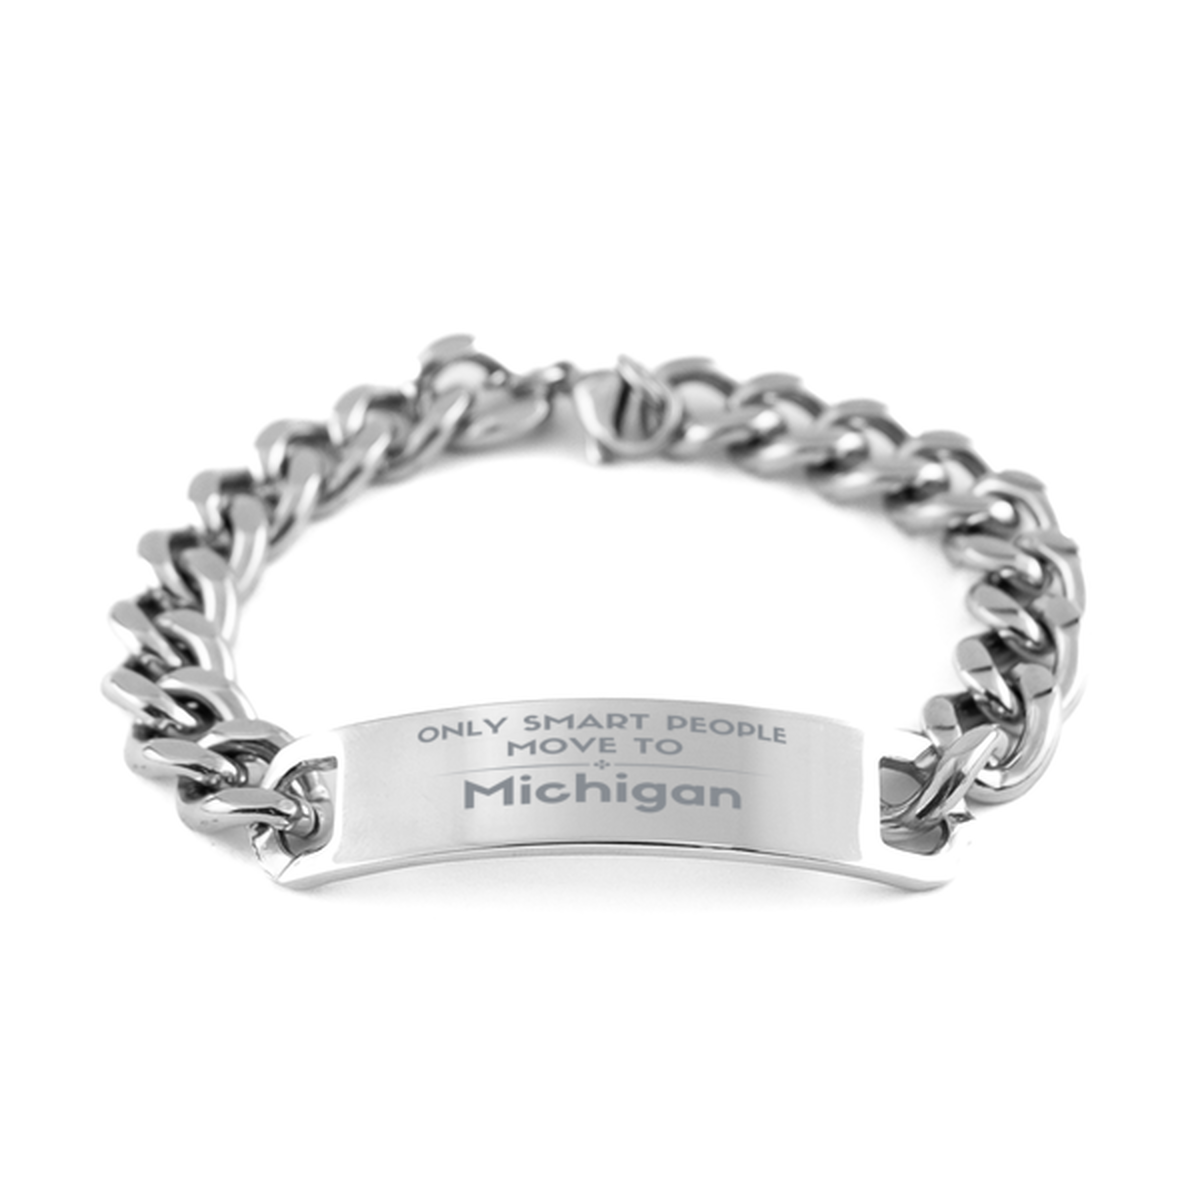 Only smart people move to Michigan Cuban Chain Stainless Steel Bracelet, Gag Gifts For Michigan, Move to Michigan Gifts for Friends Coworker Funny Saying Quote